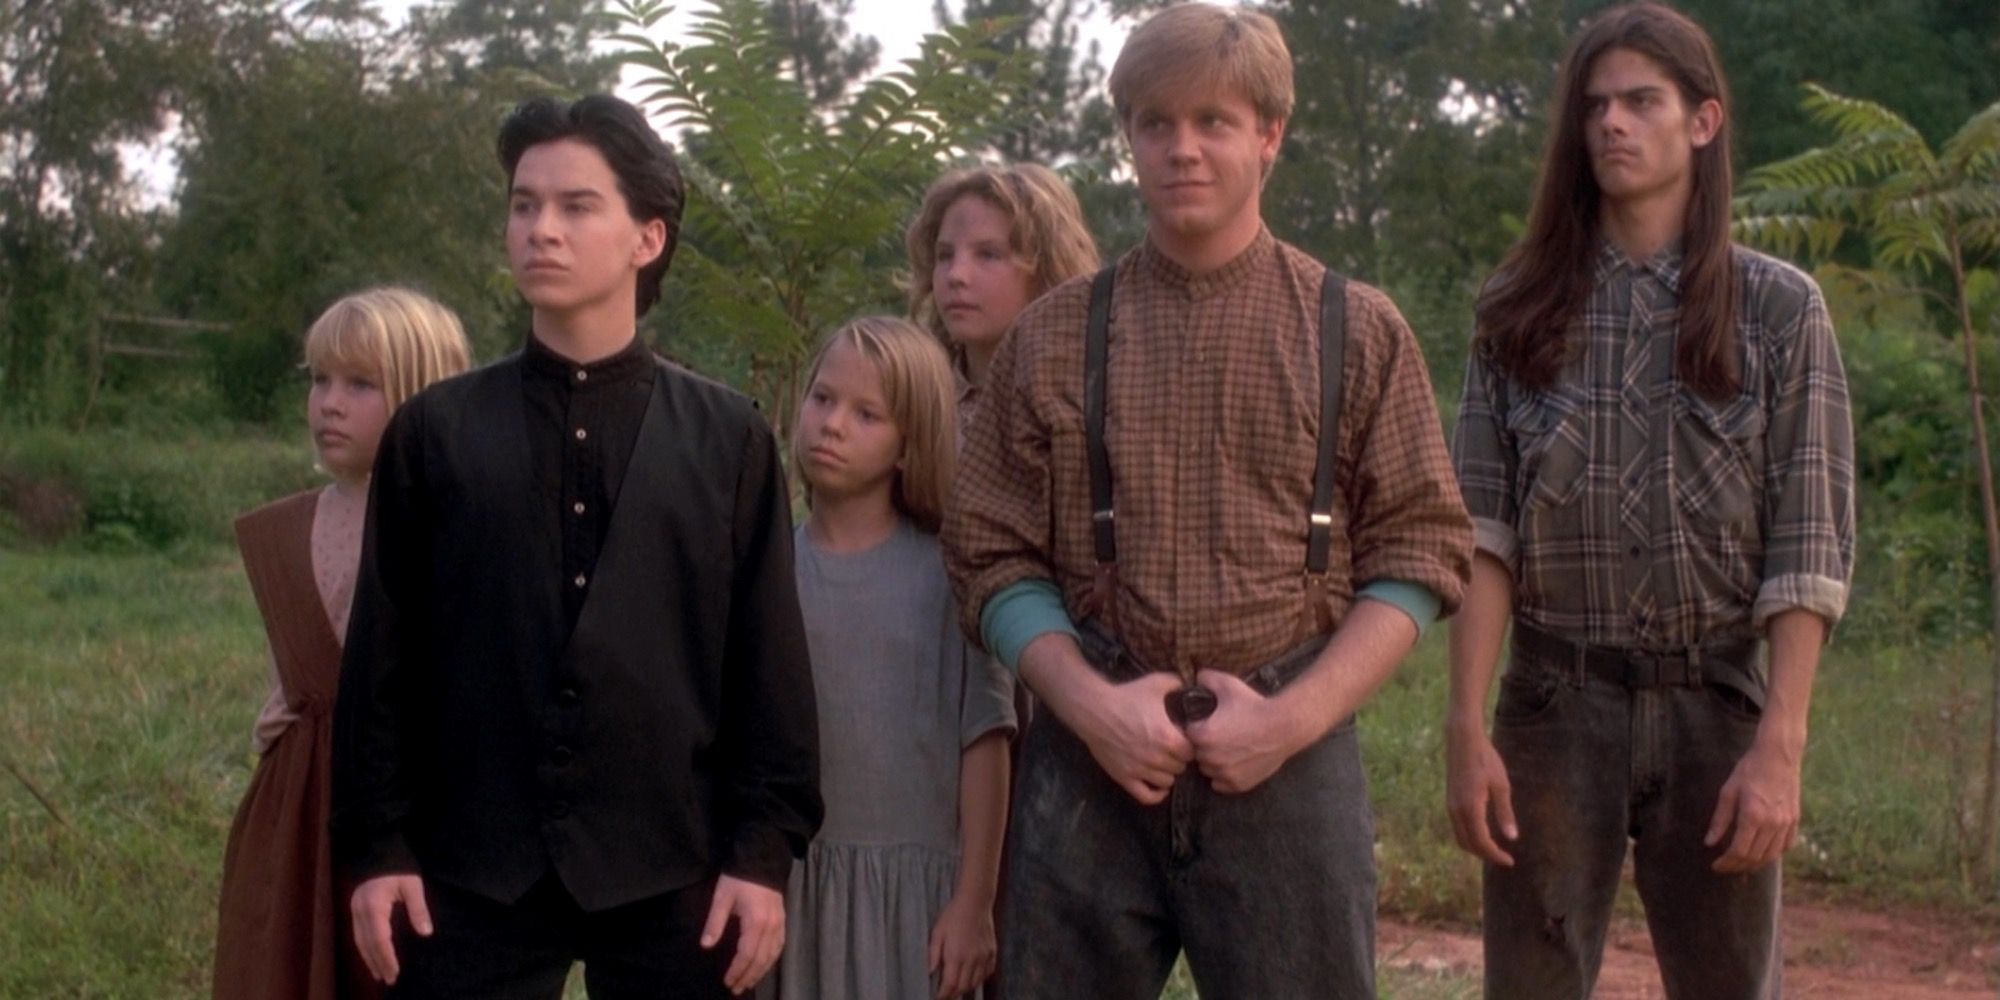 Scenes featuring characters from Children of the Corn 2